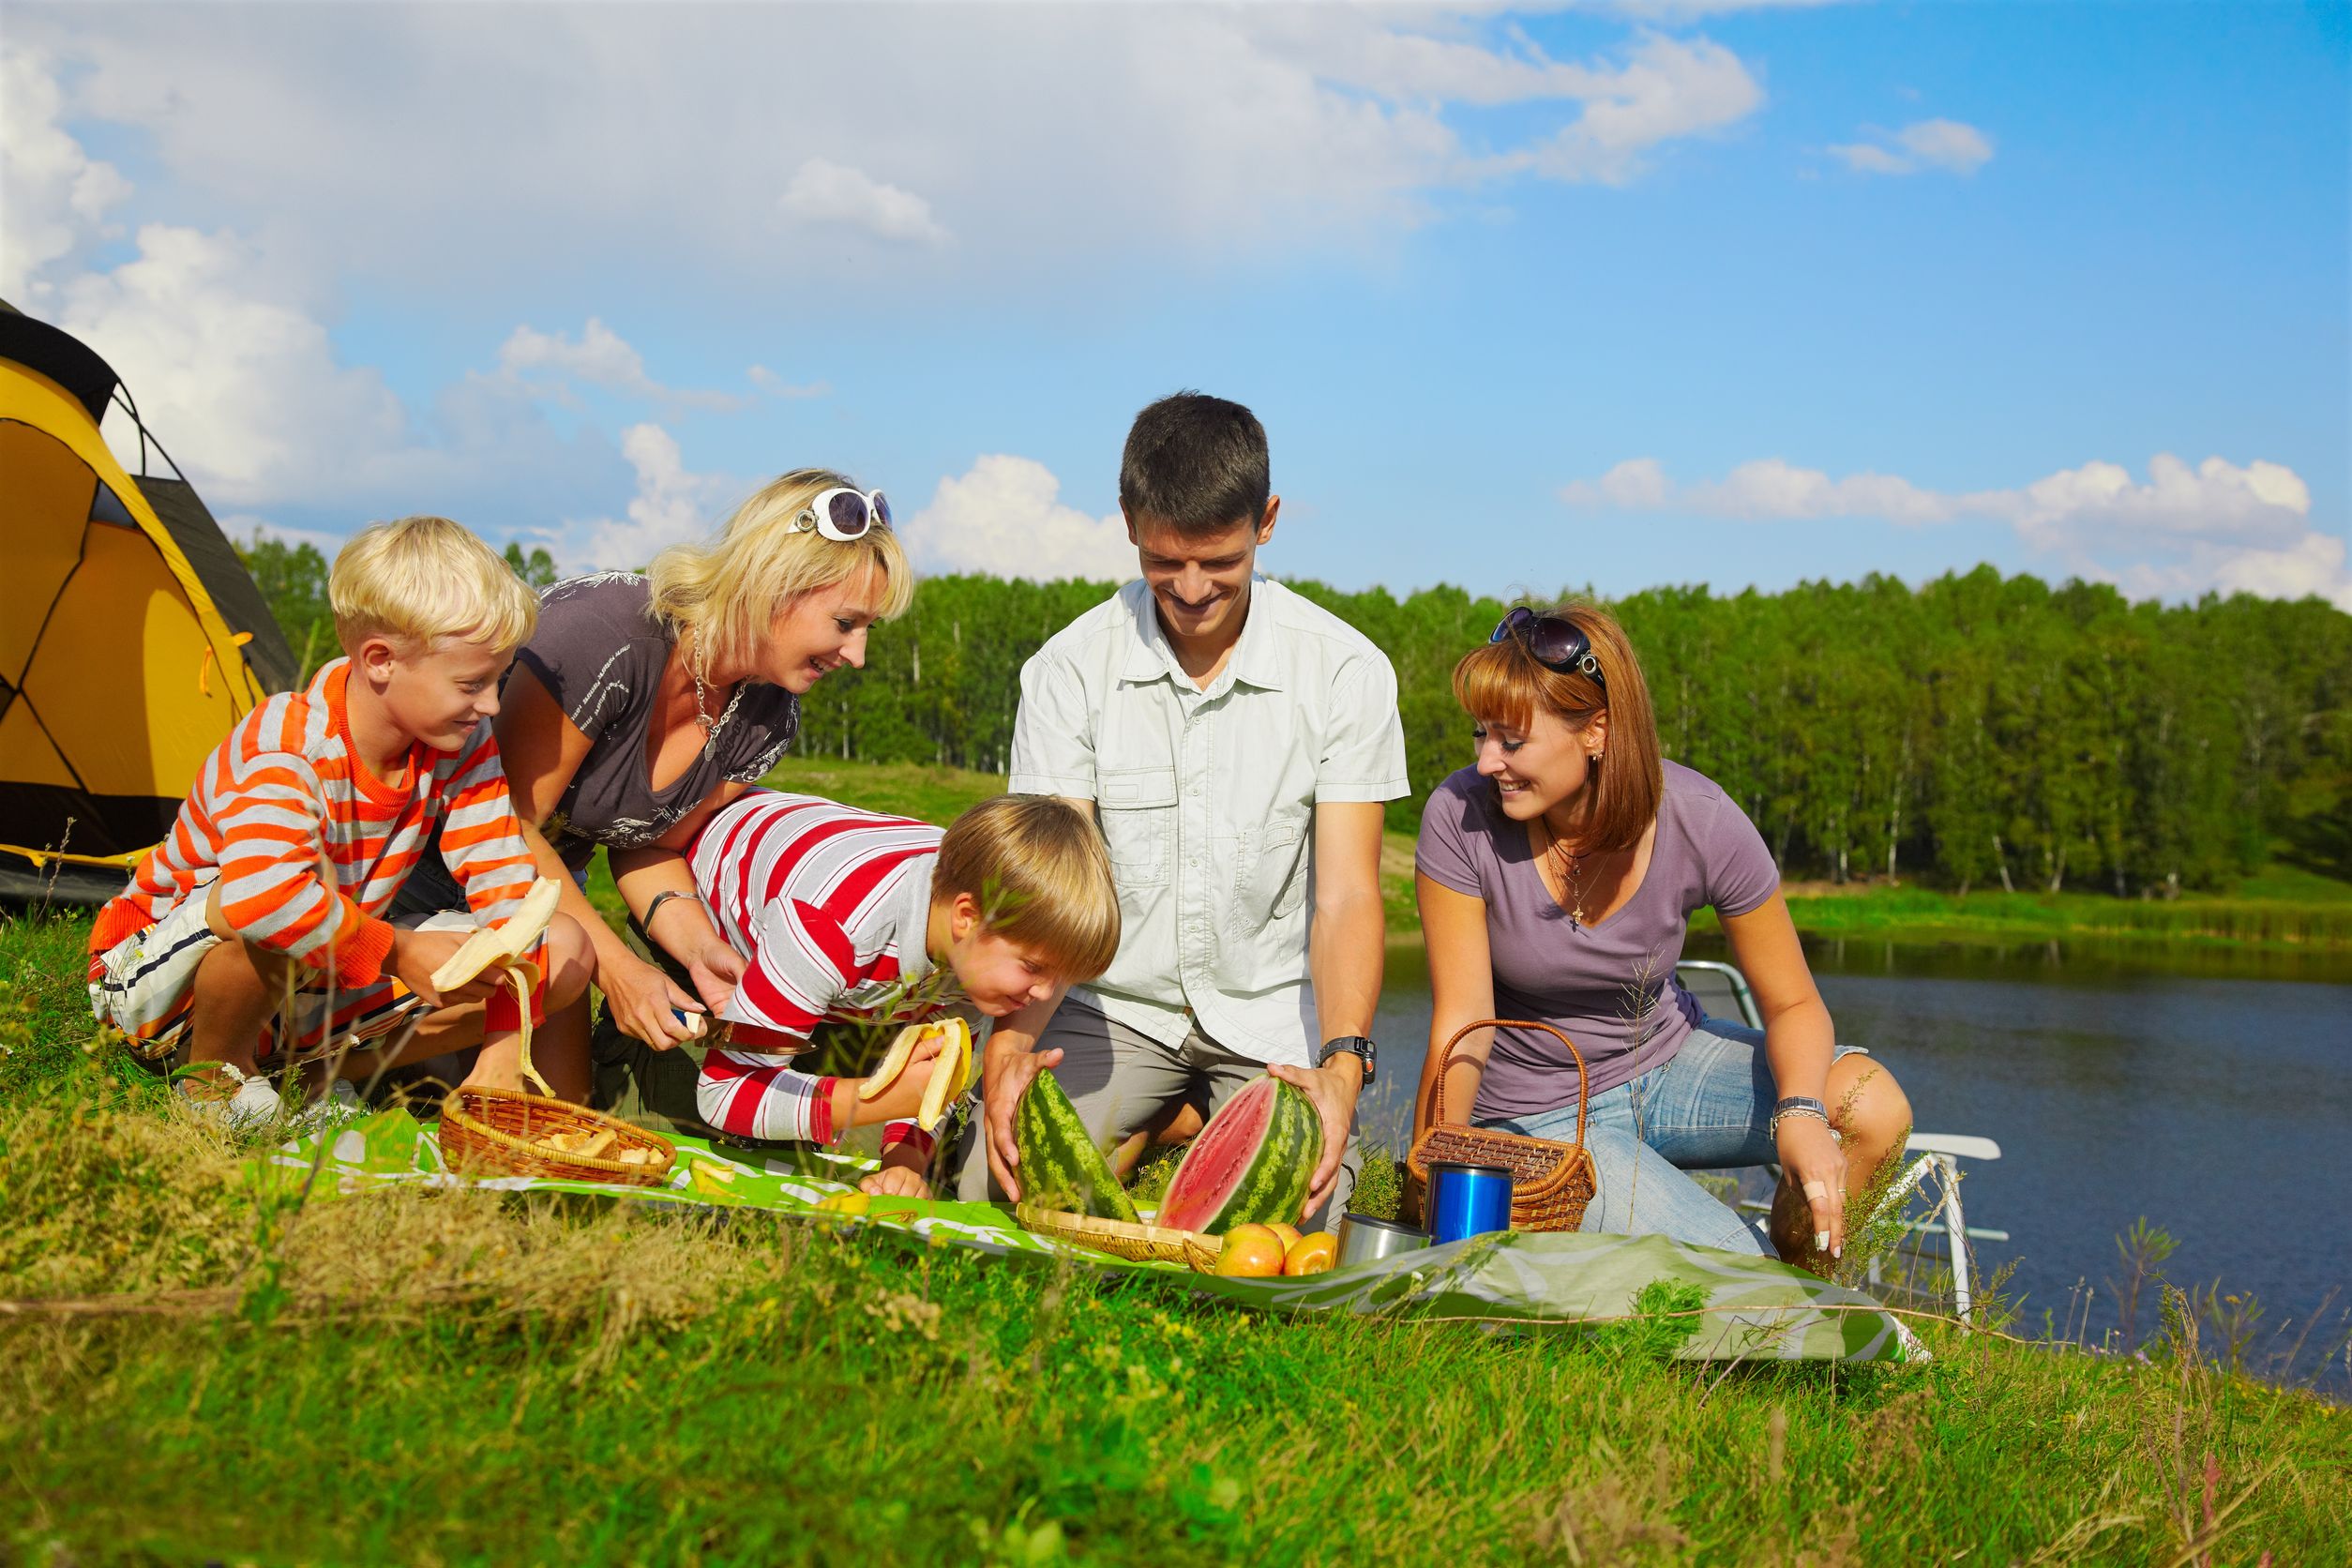 Choosing Family Fun Activities in Naples Is Easy and Quick